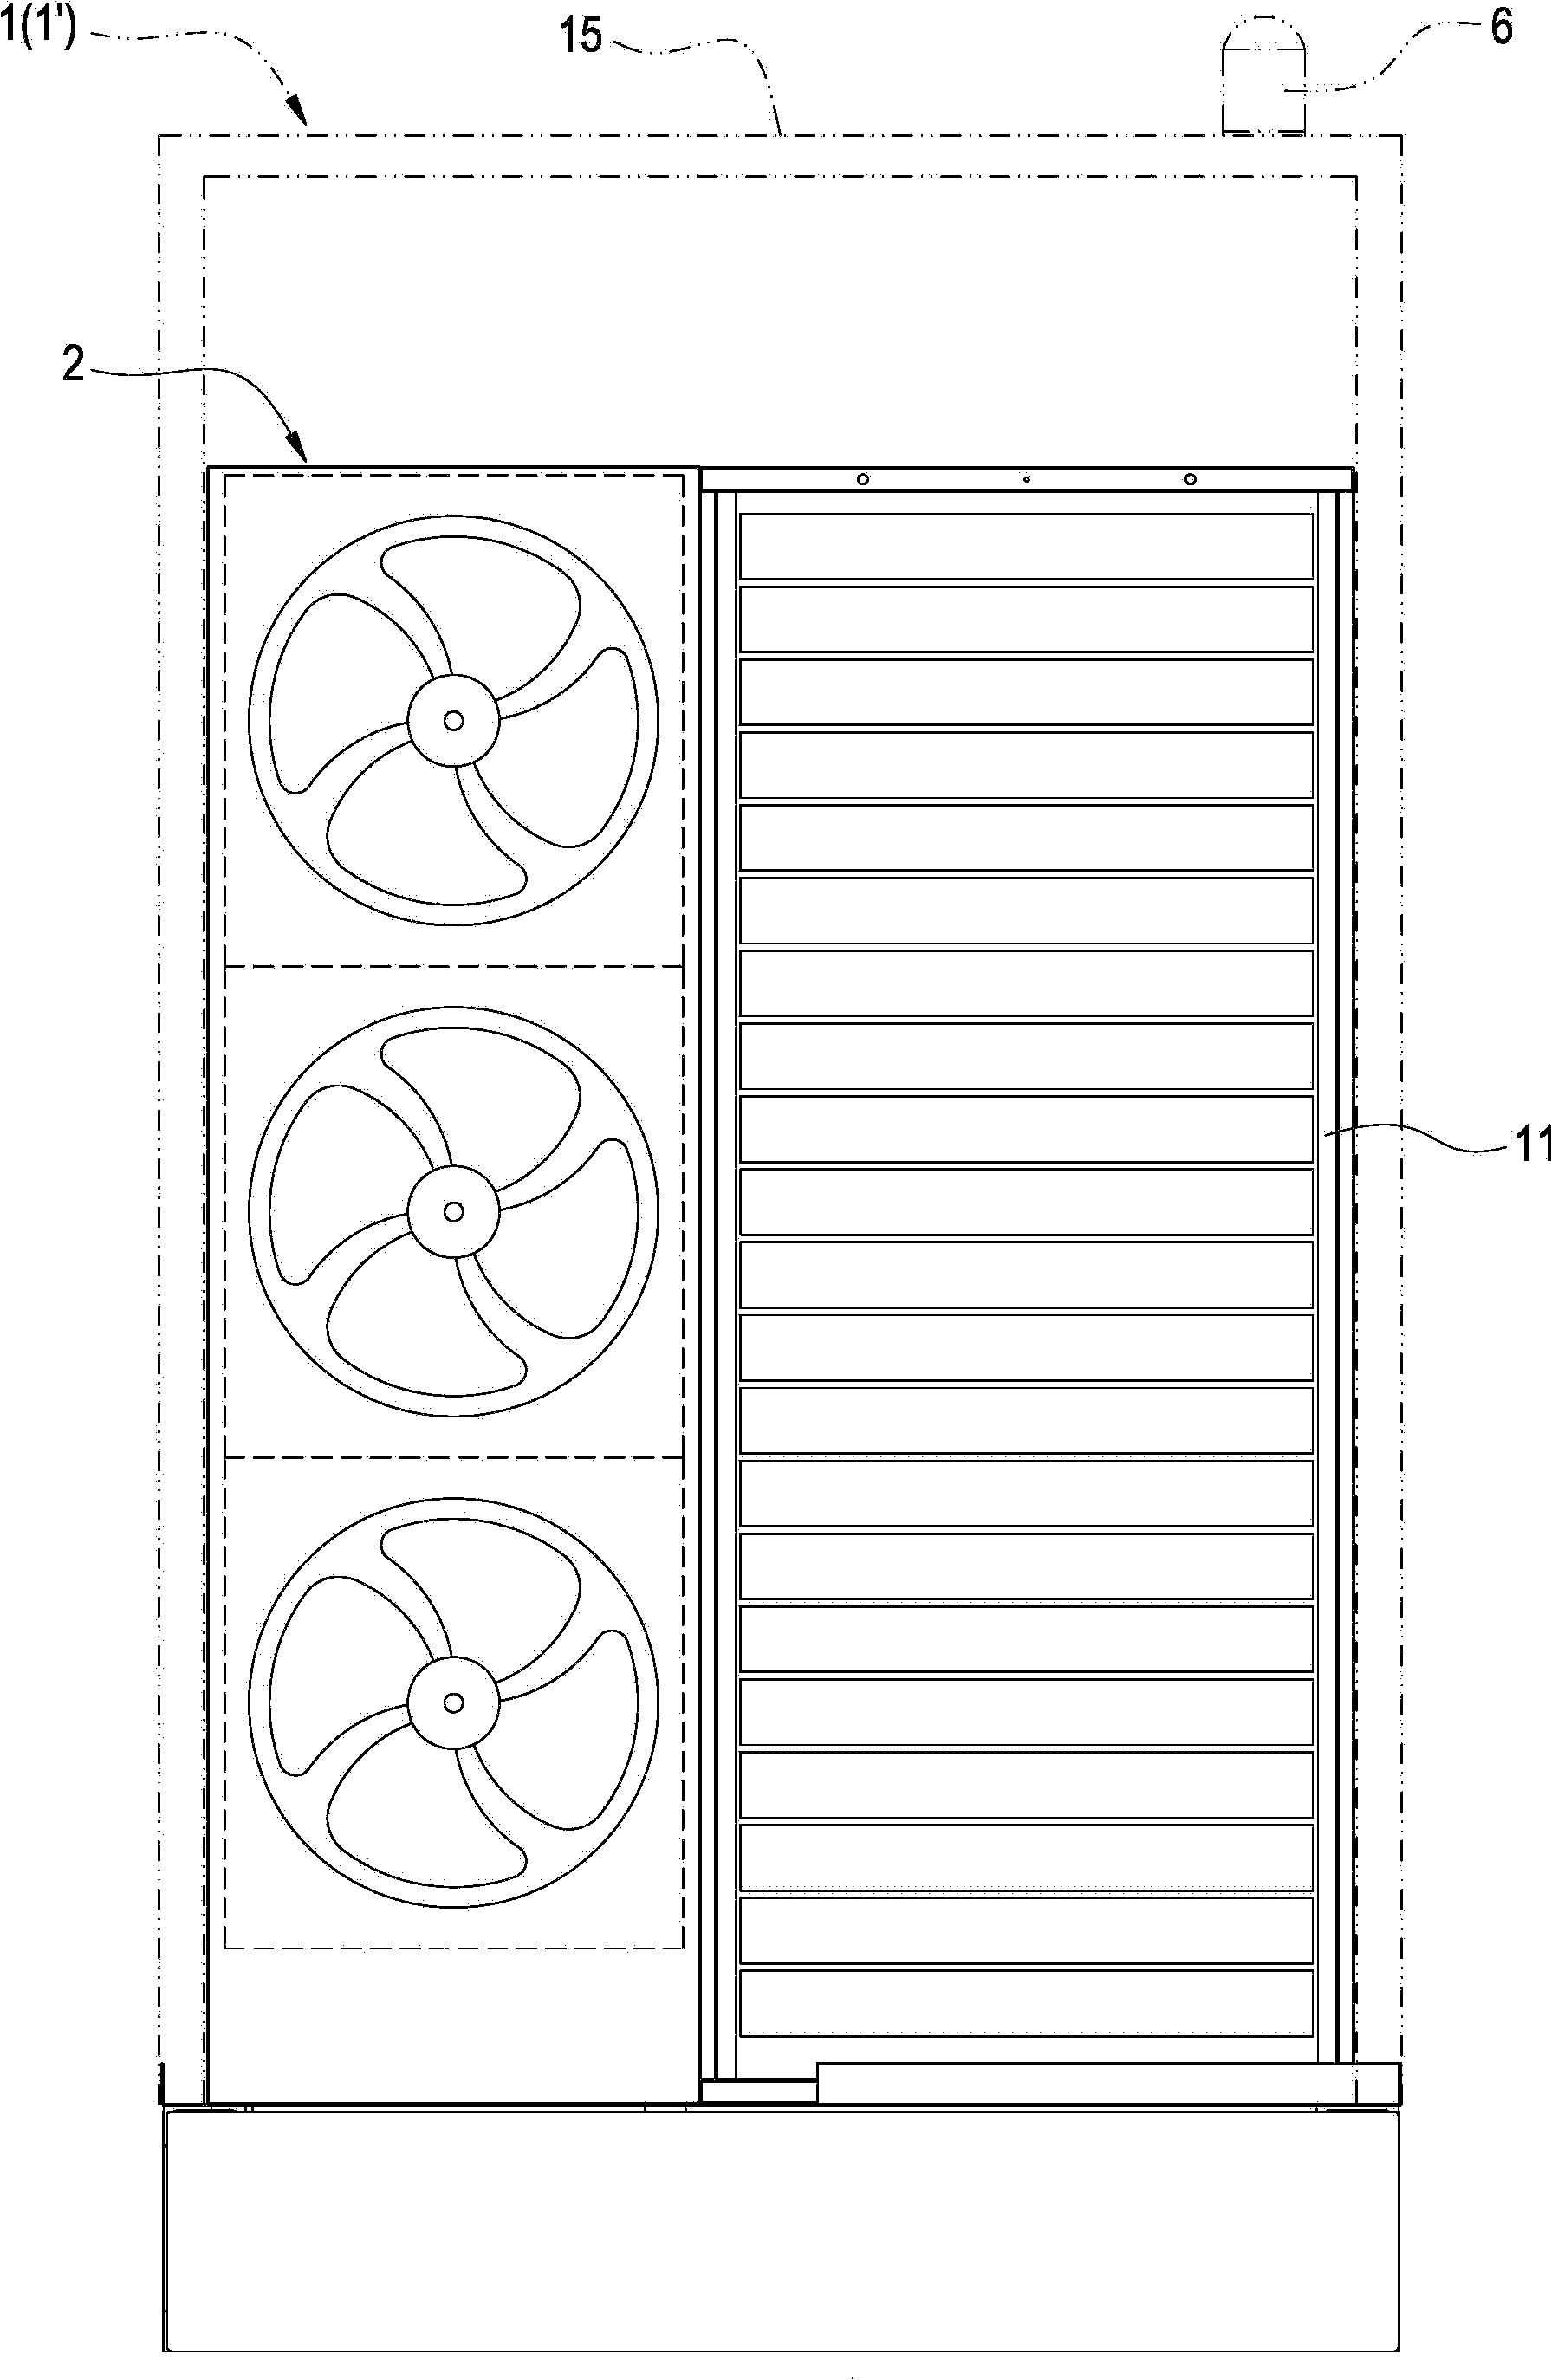 Equipment cabinet system and exhaust equipment thereof